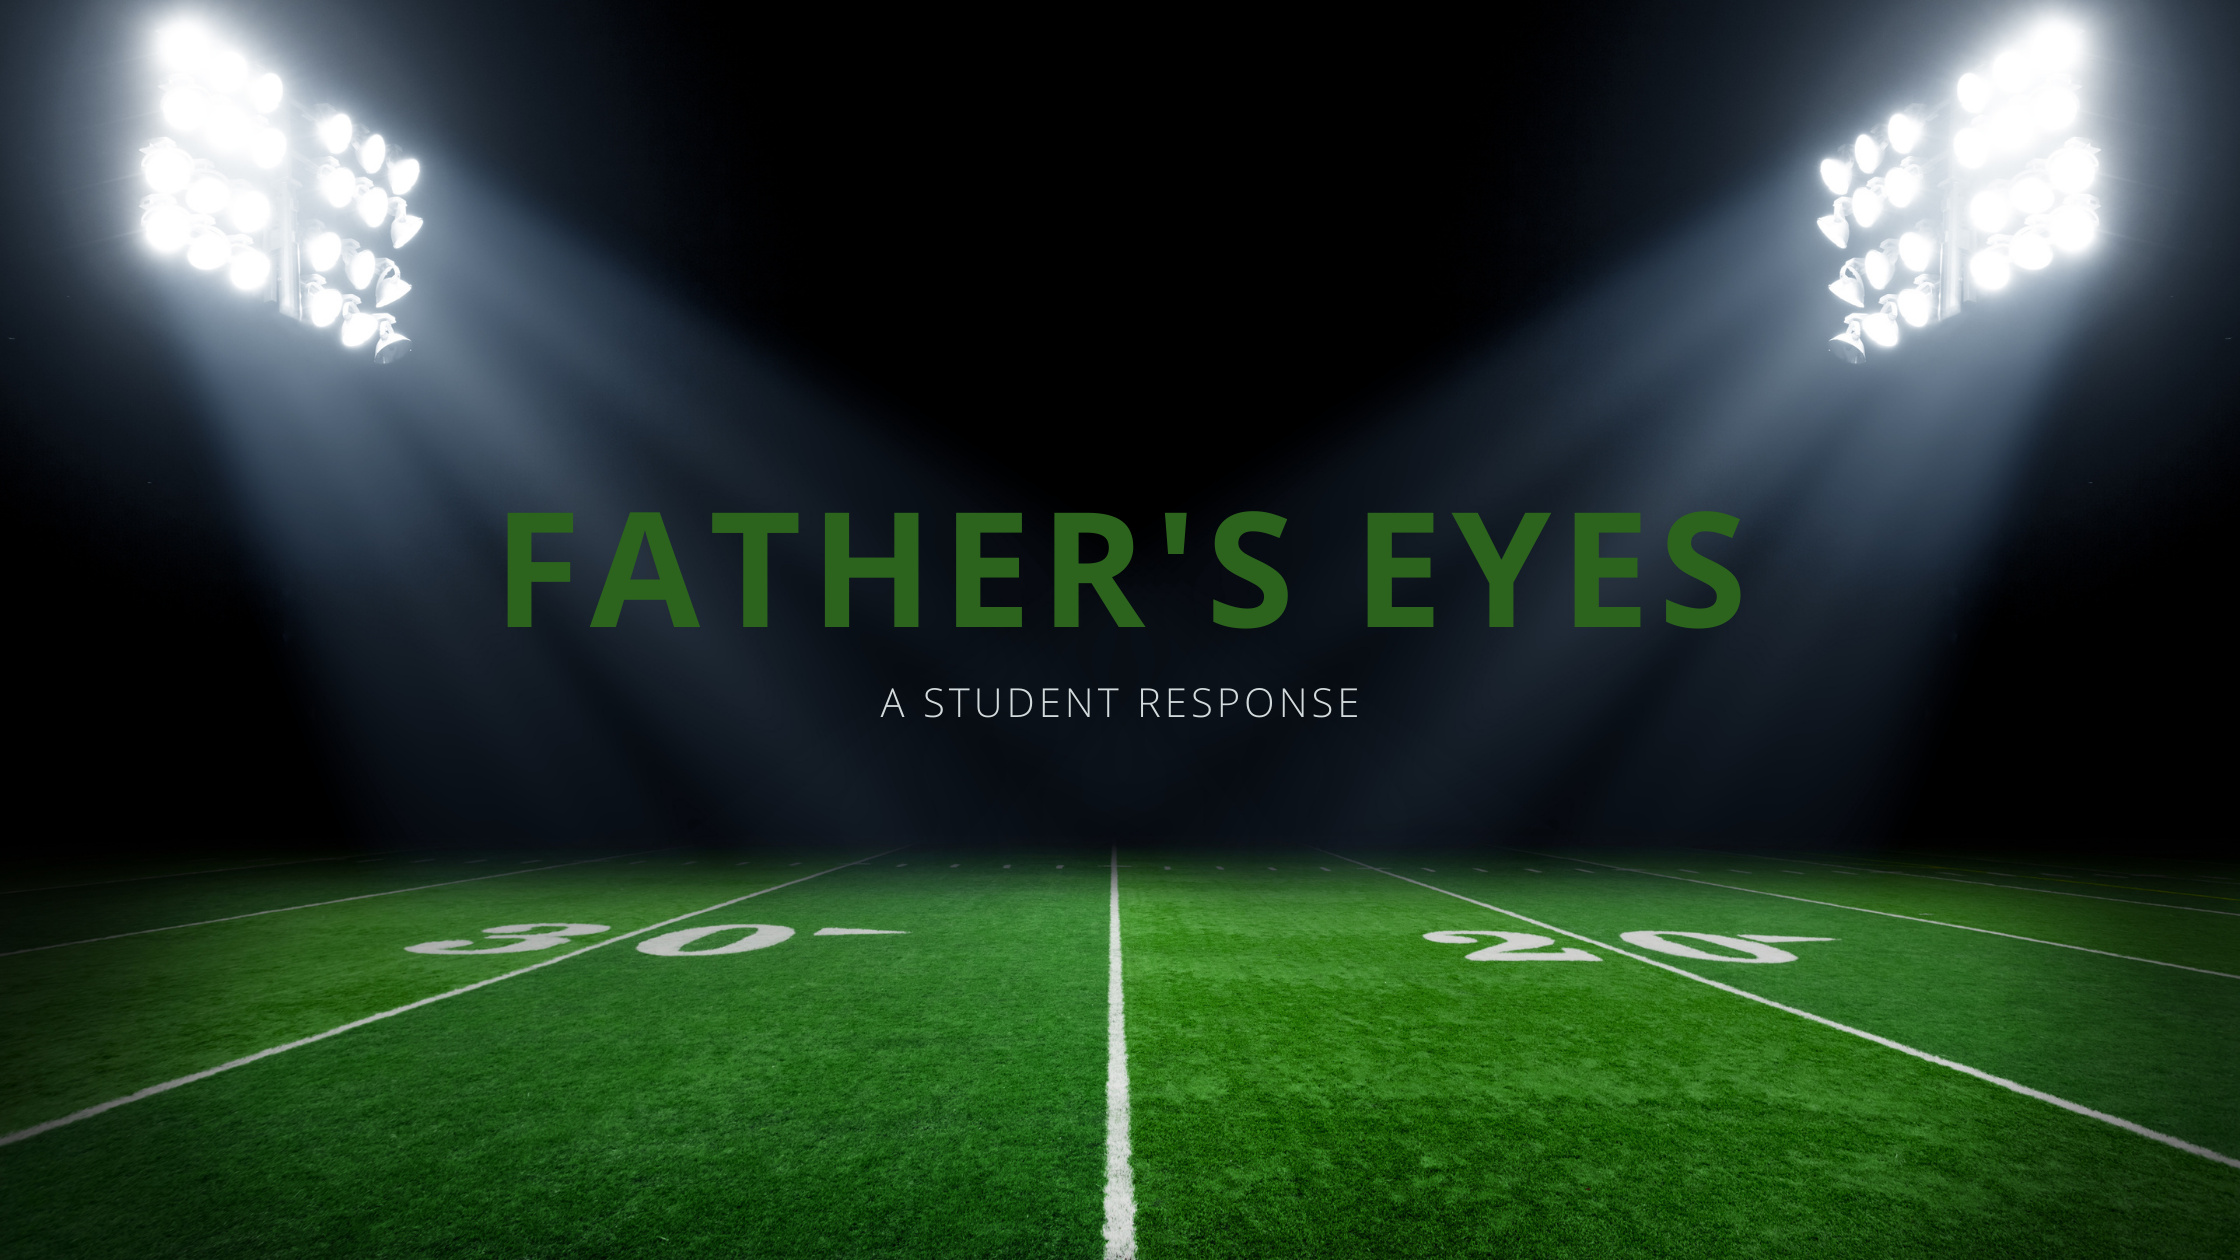 You are currently viewing Student Response to “Father’s Eyes” in 2021